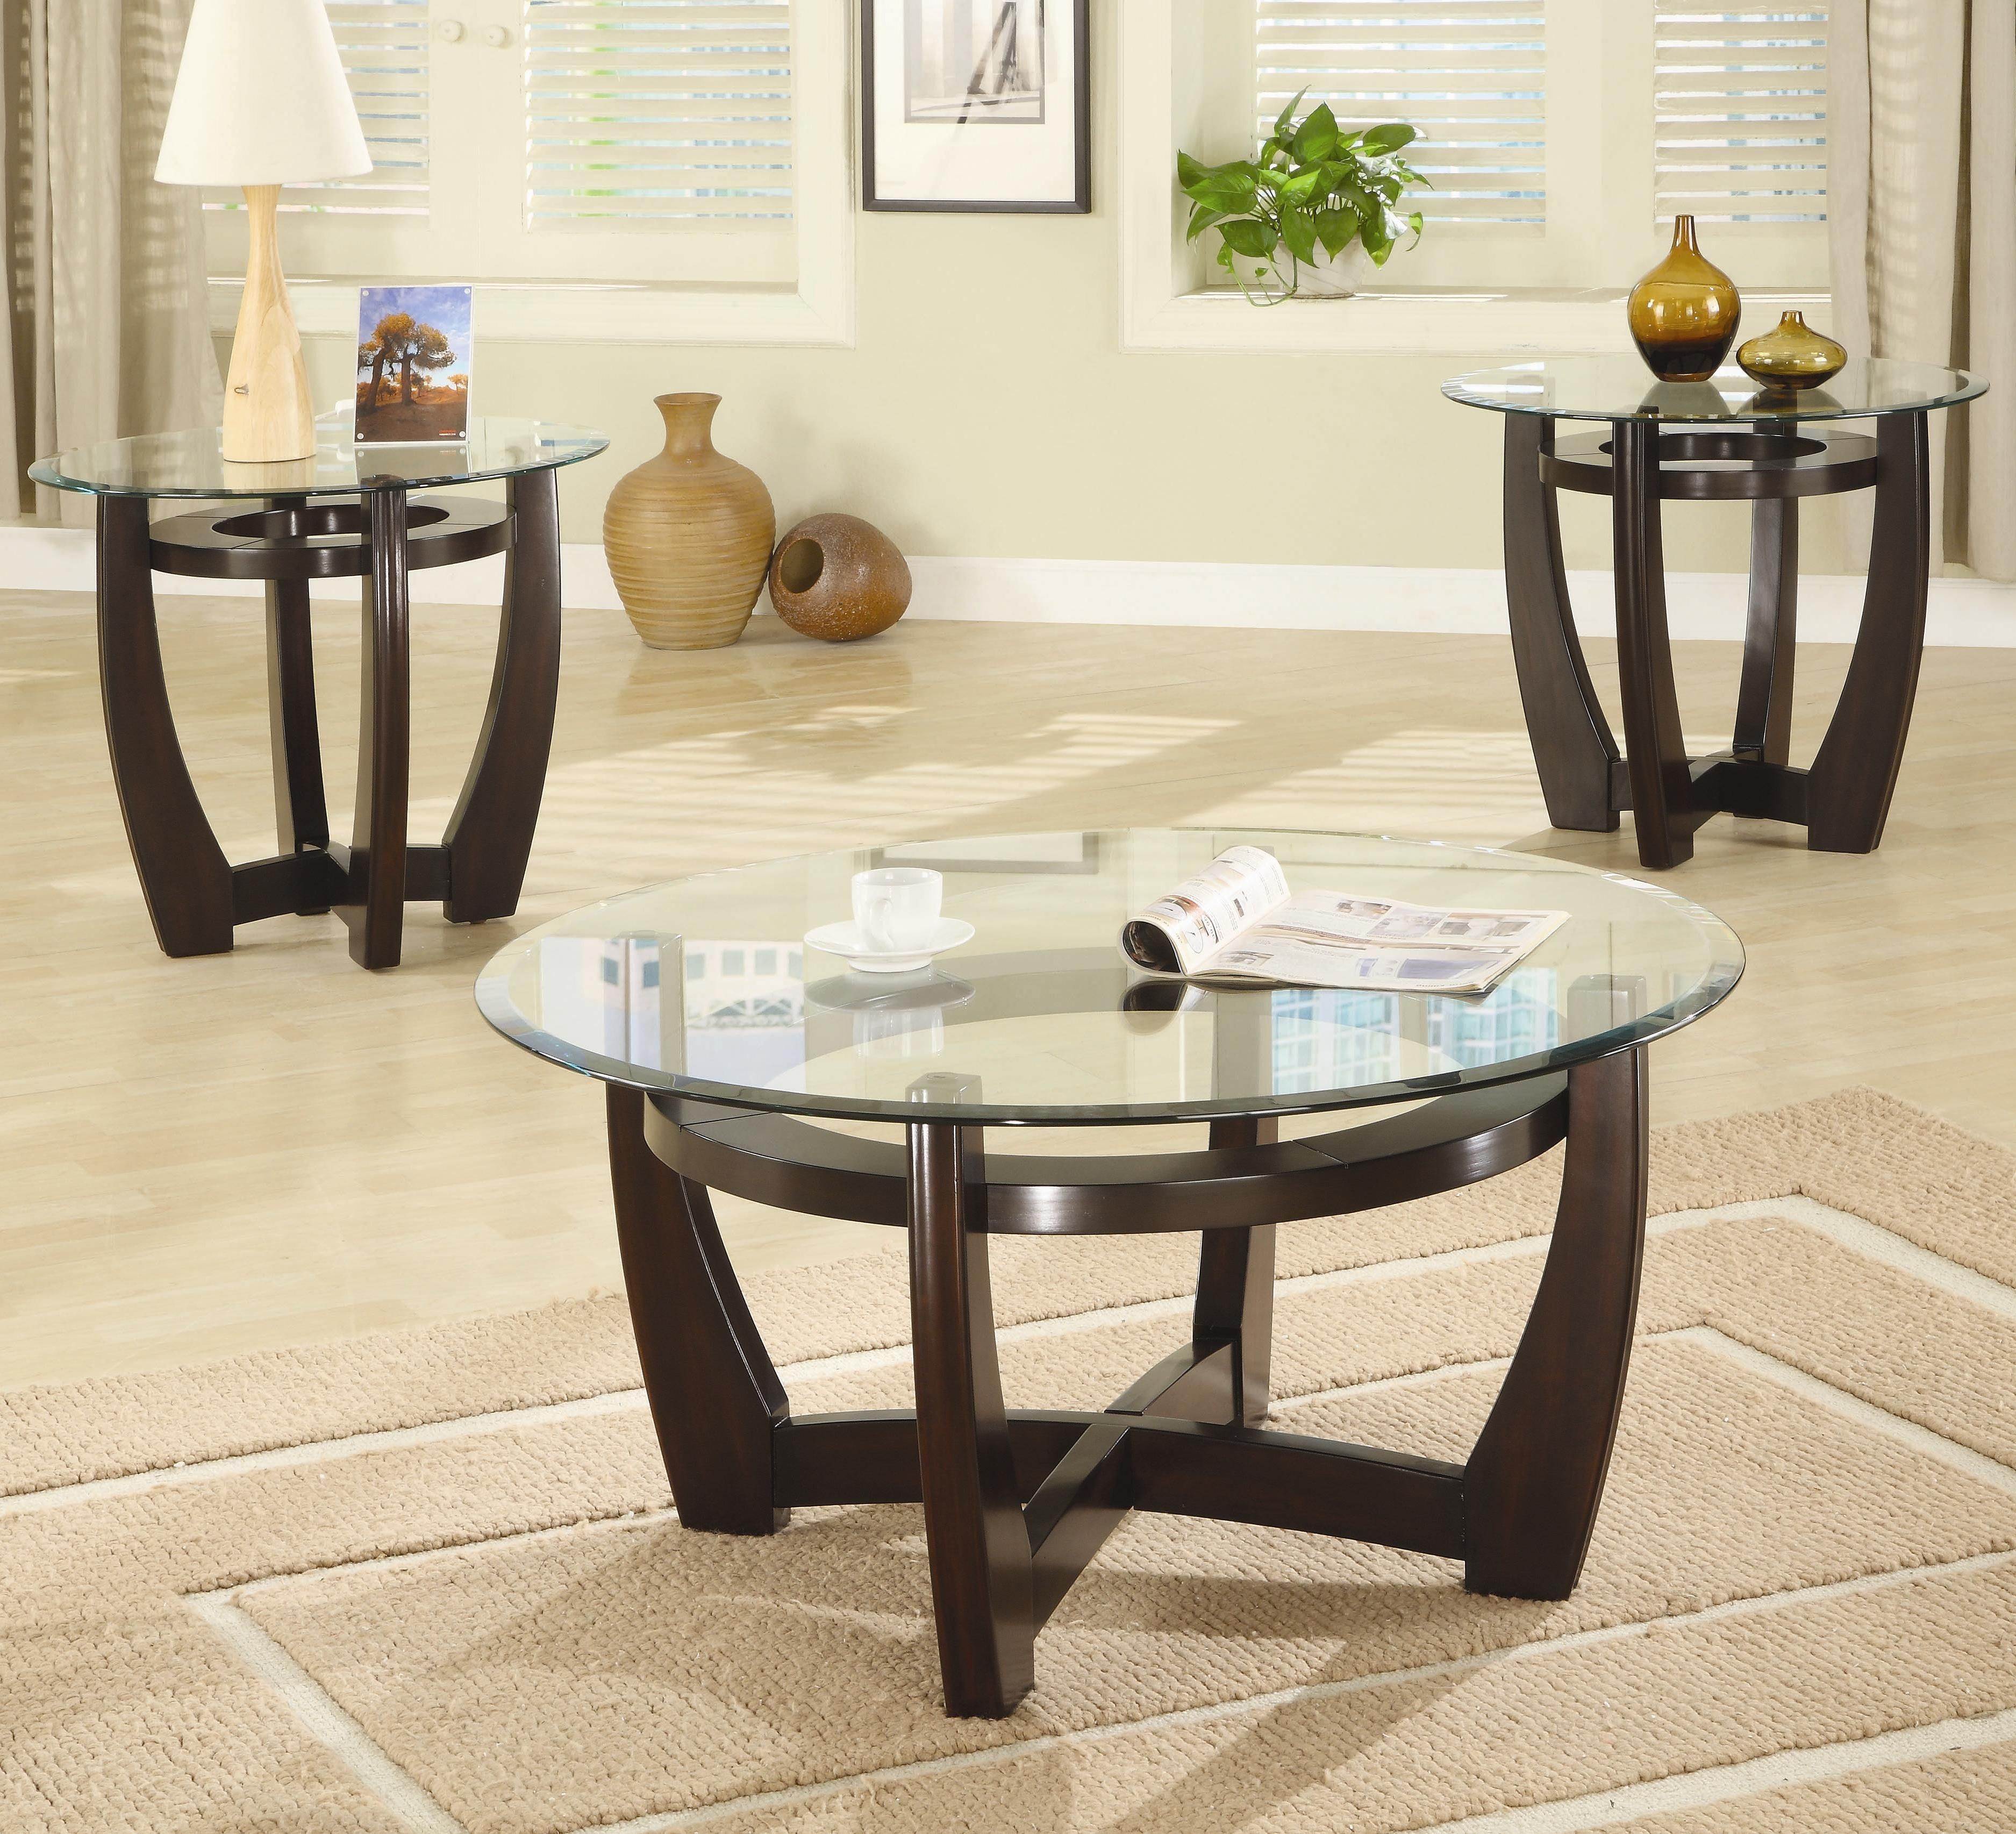 Sofa Table Sets Pertaining To Sofa Table Chairs (View 13 of 15)